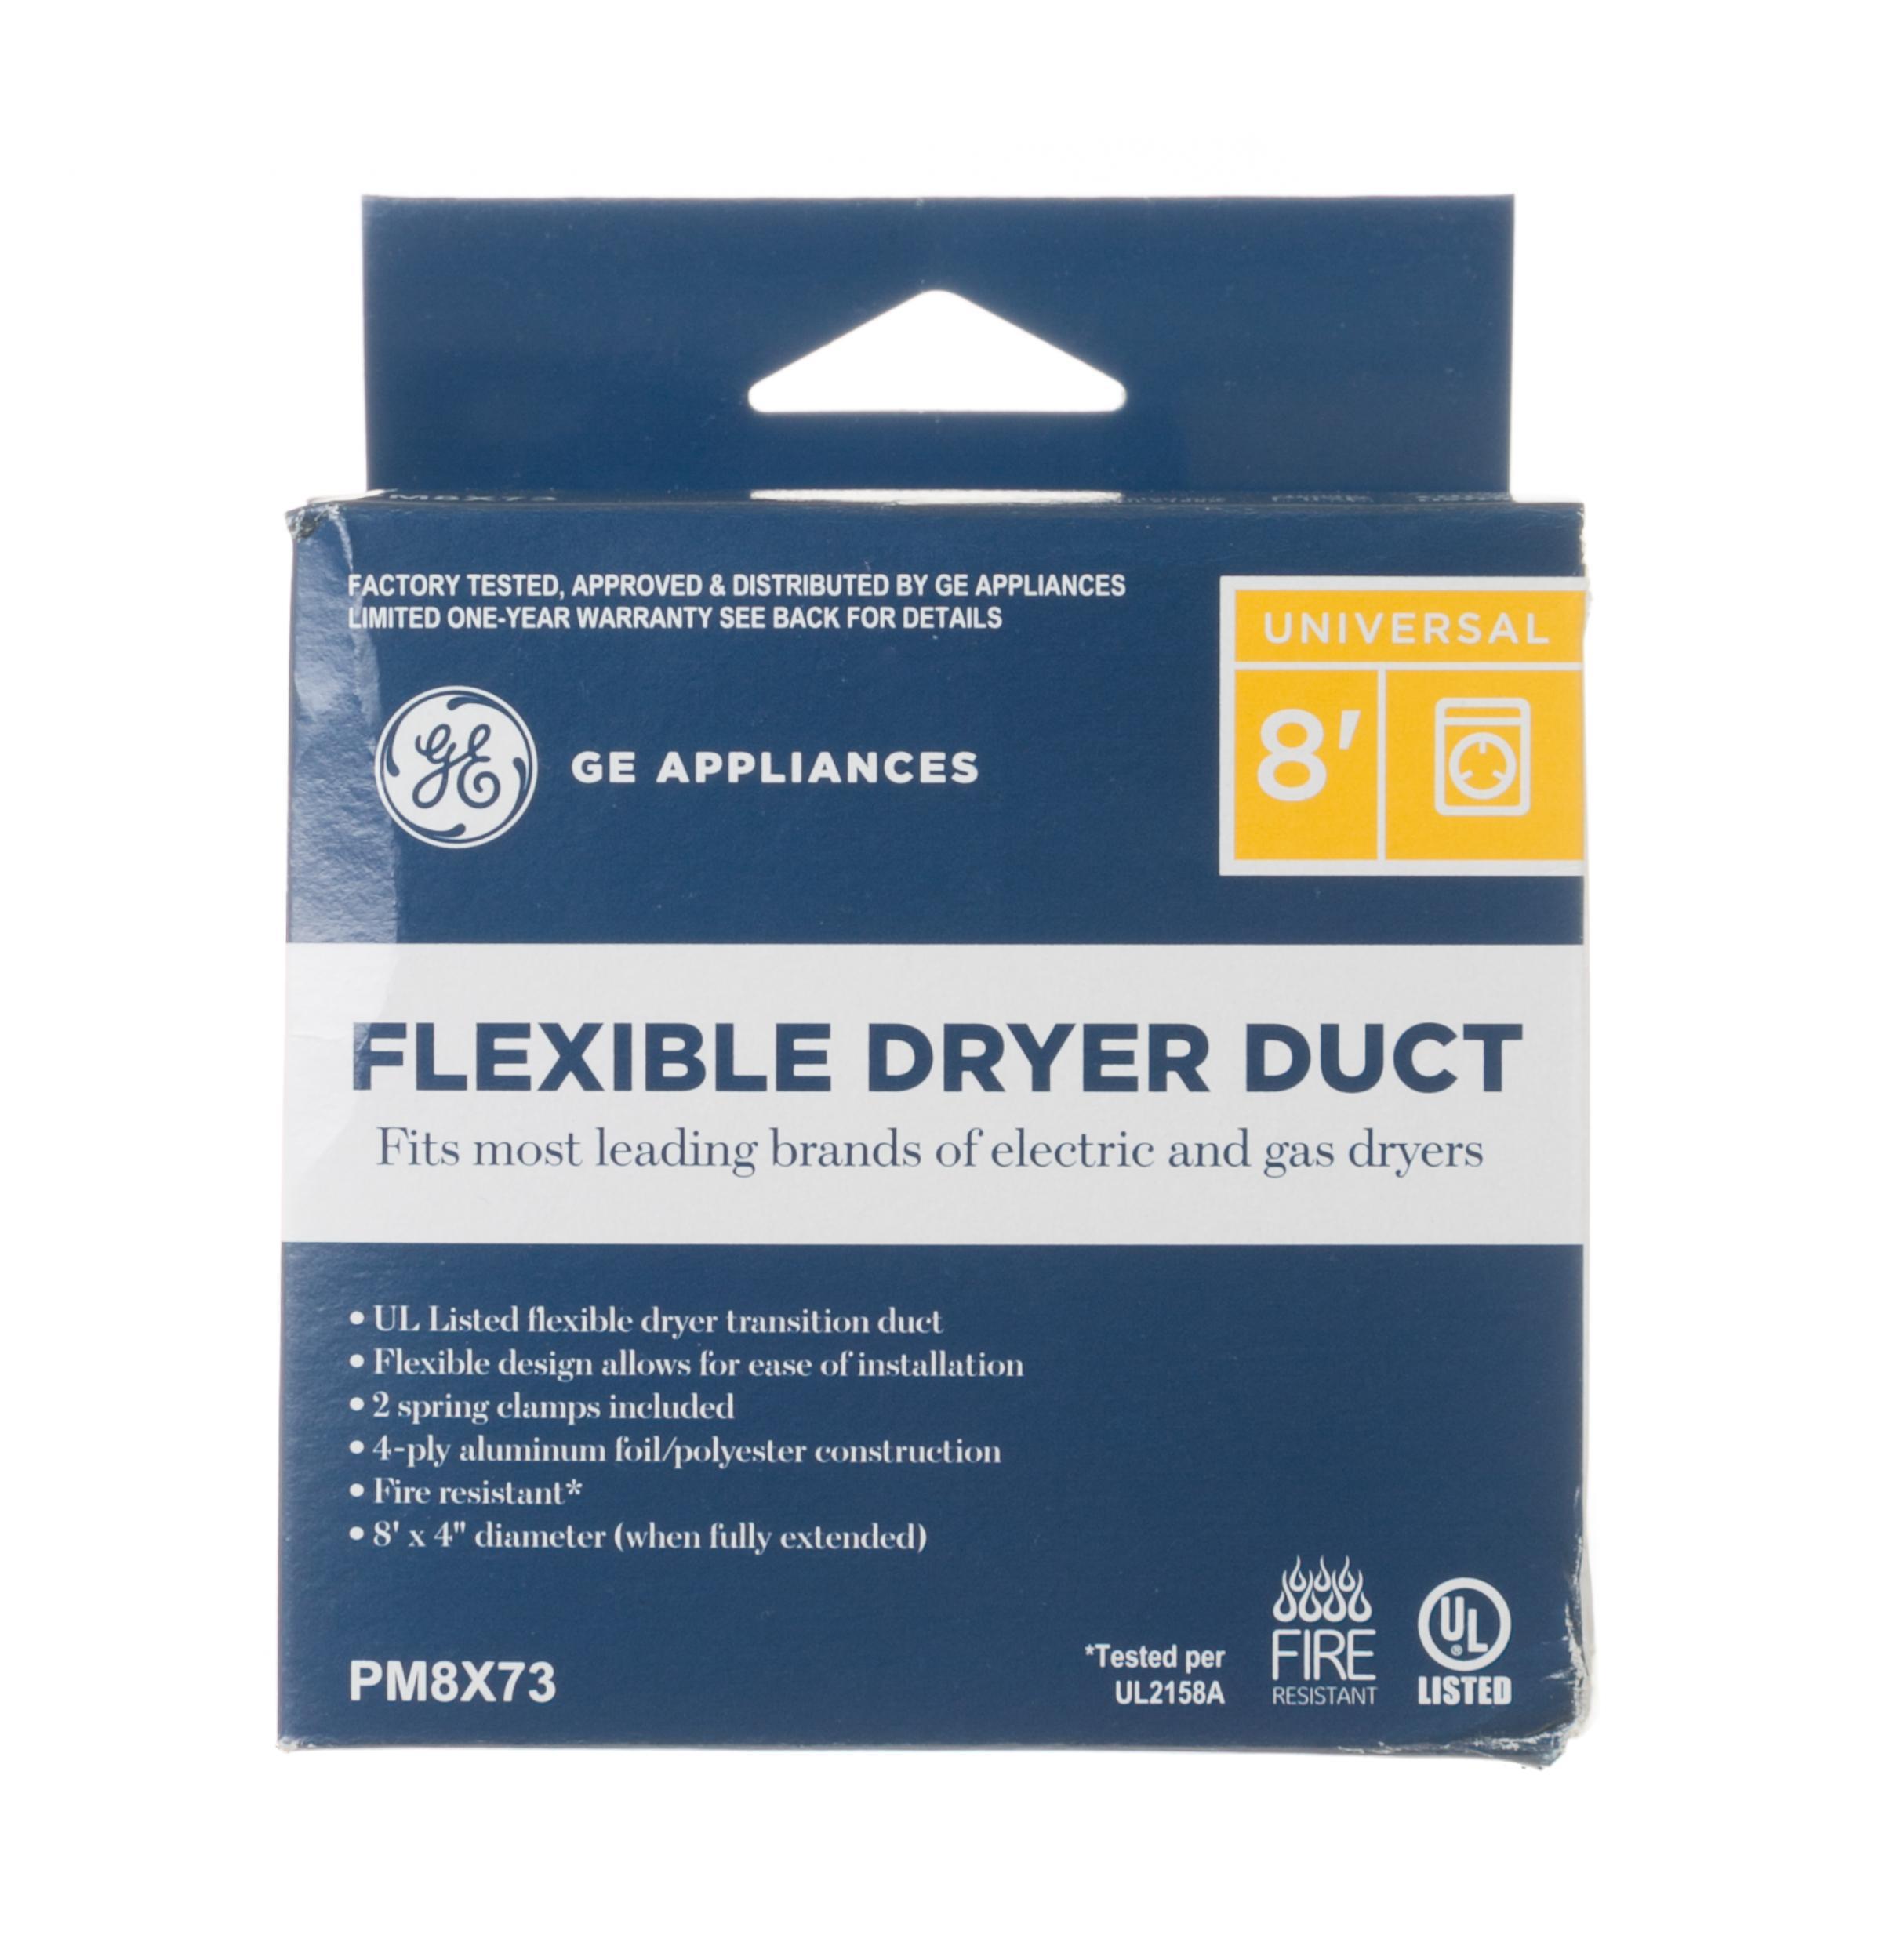 Flexible Foil Dryer Transition Duct with 2 Clamps, 8 Foot